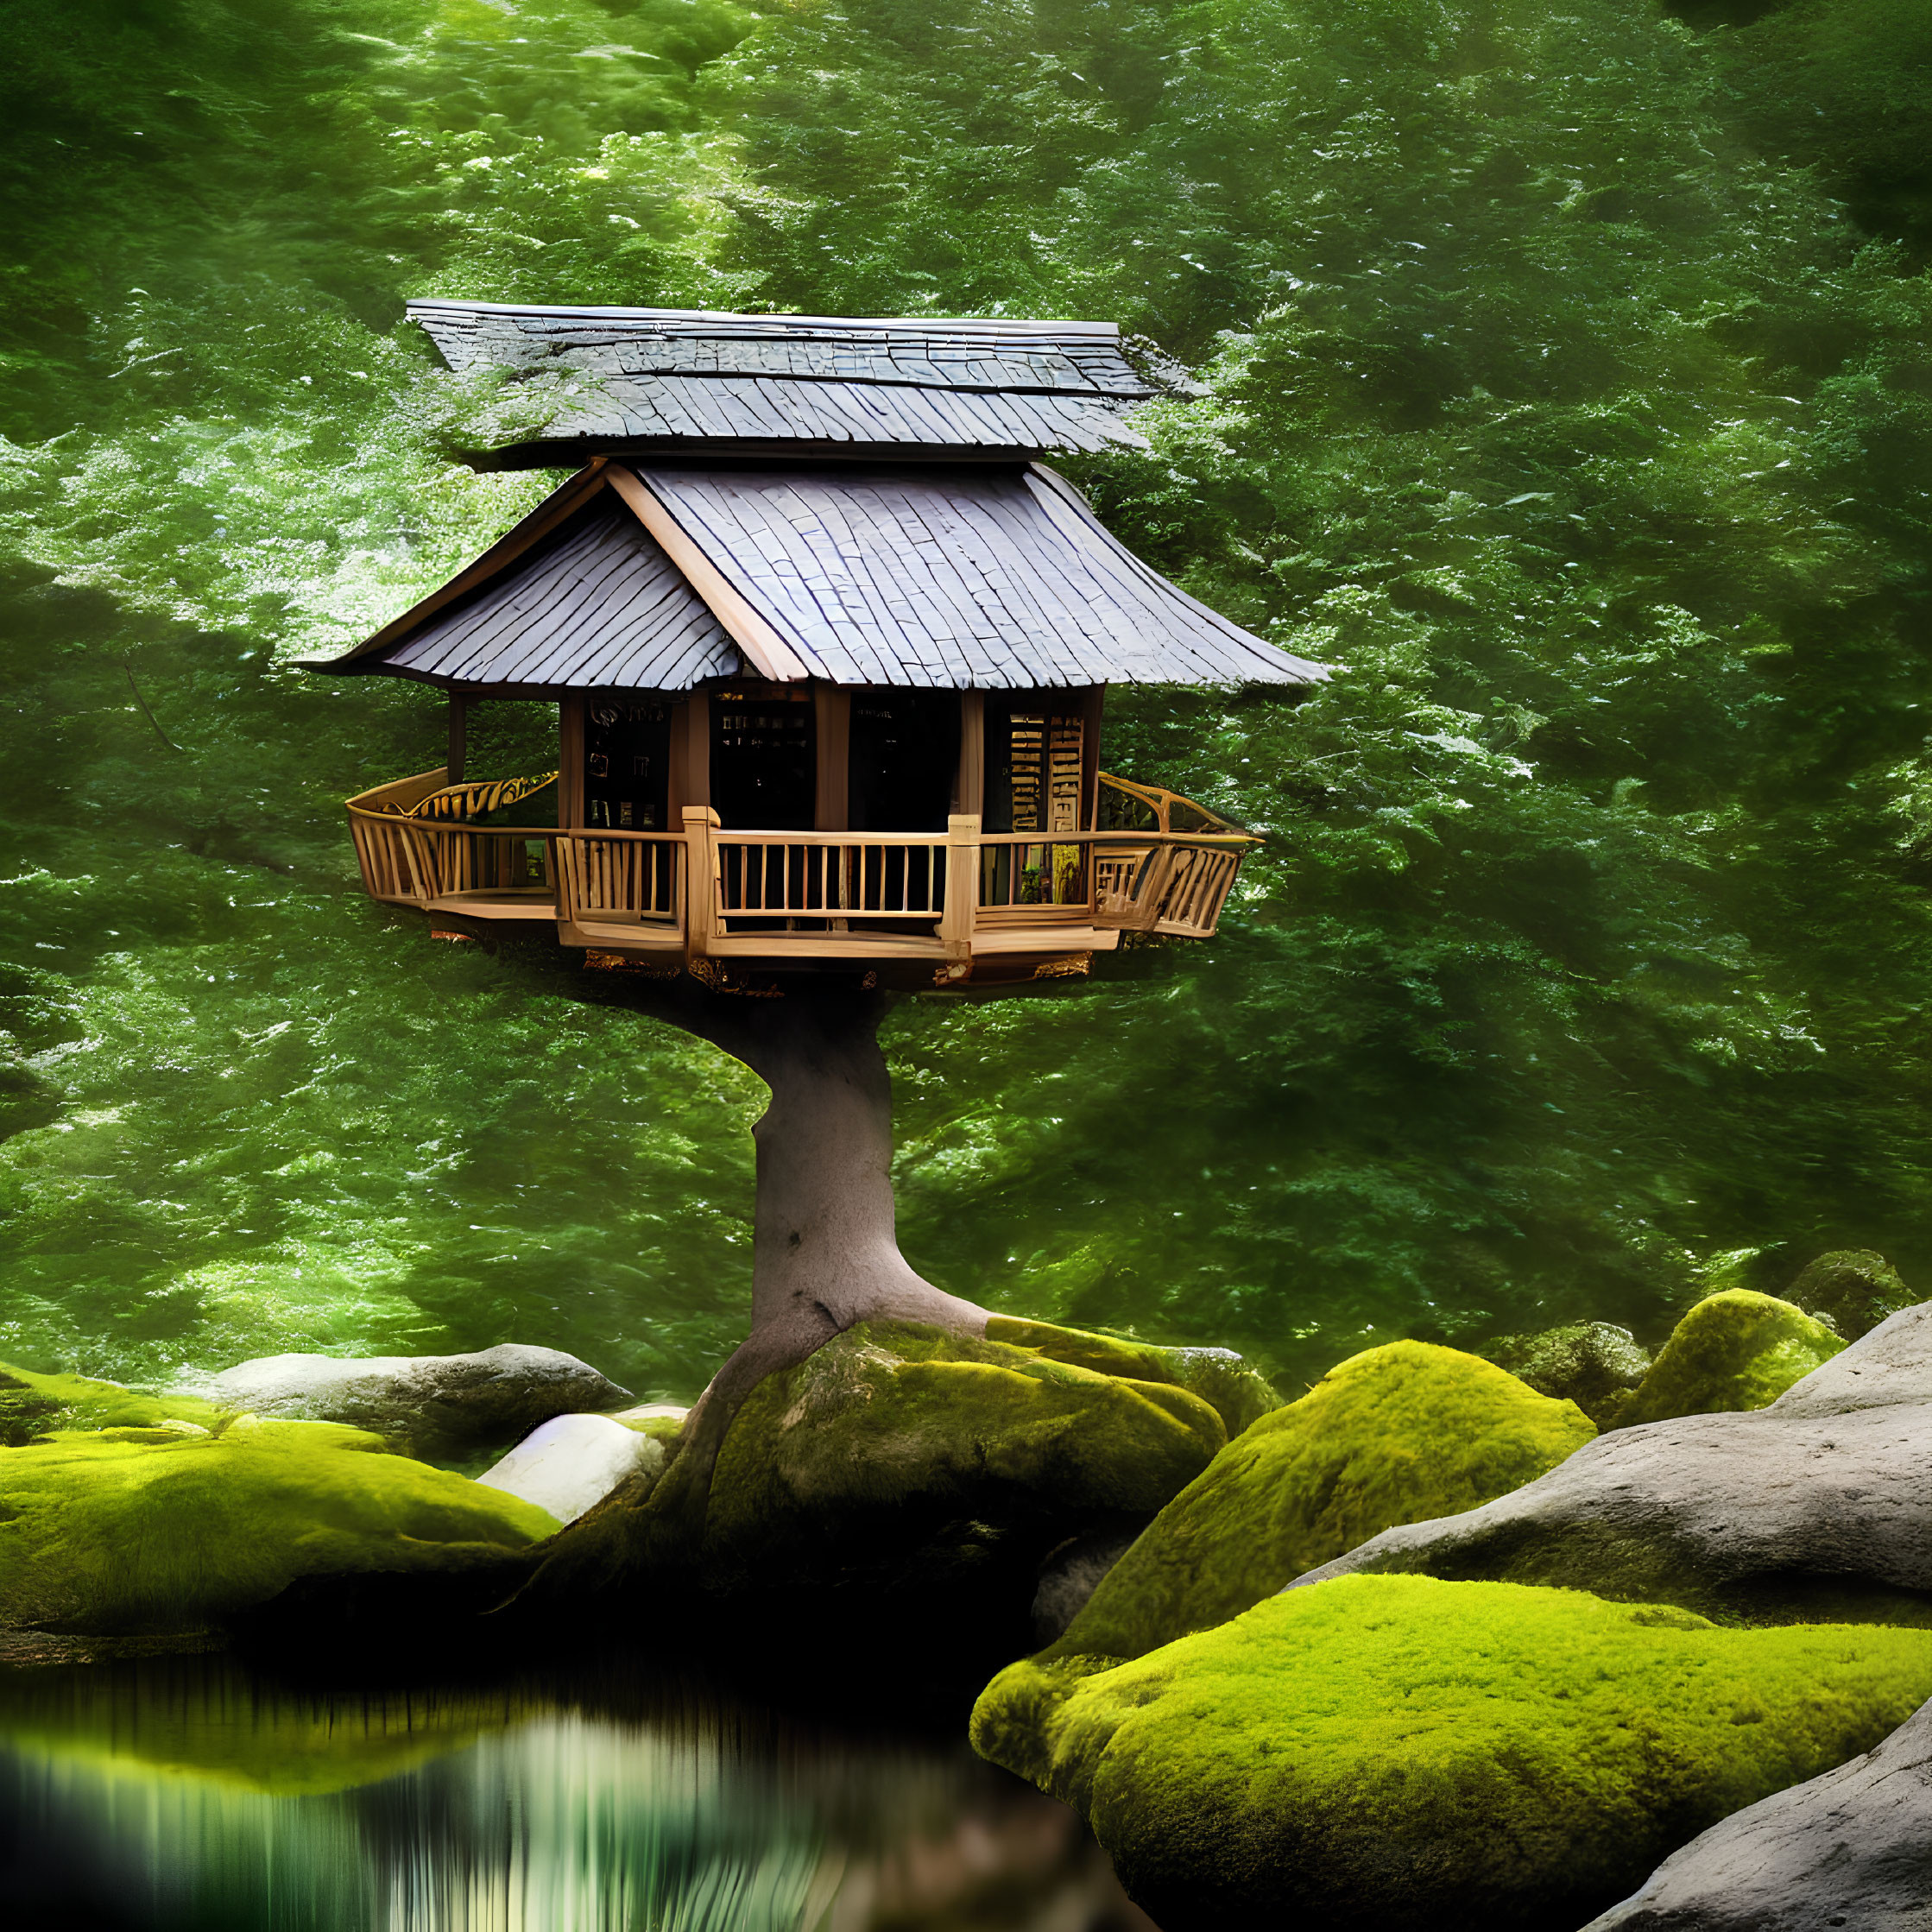 Tranquil treehouse in lush green setting